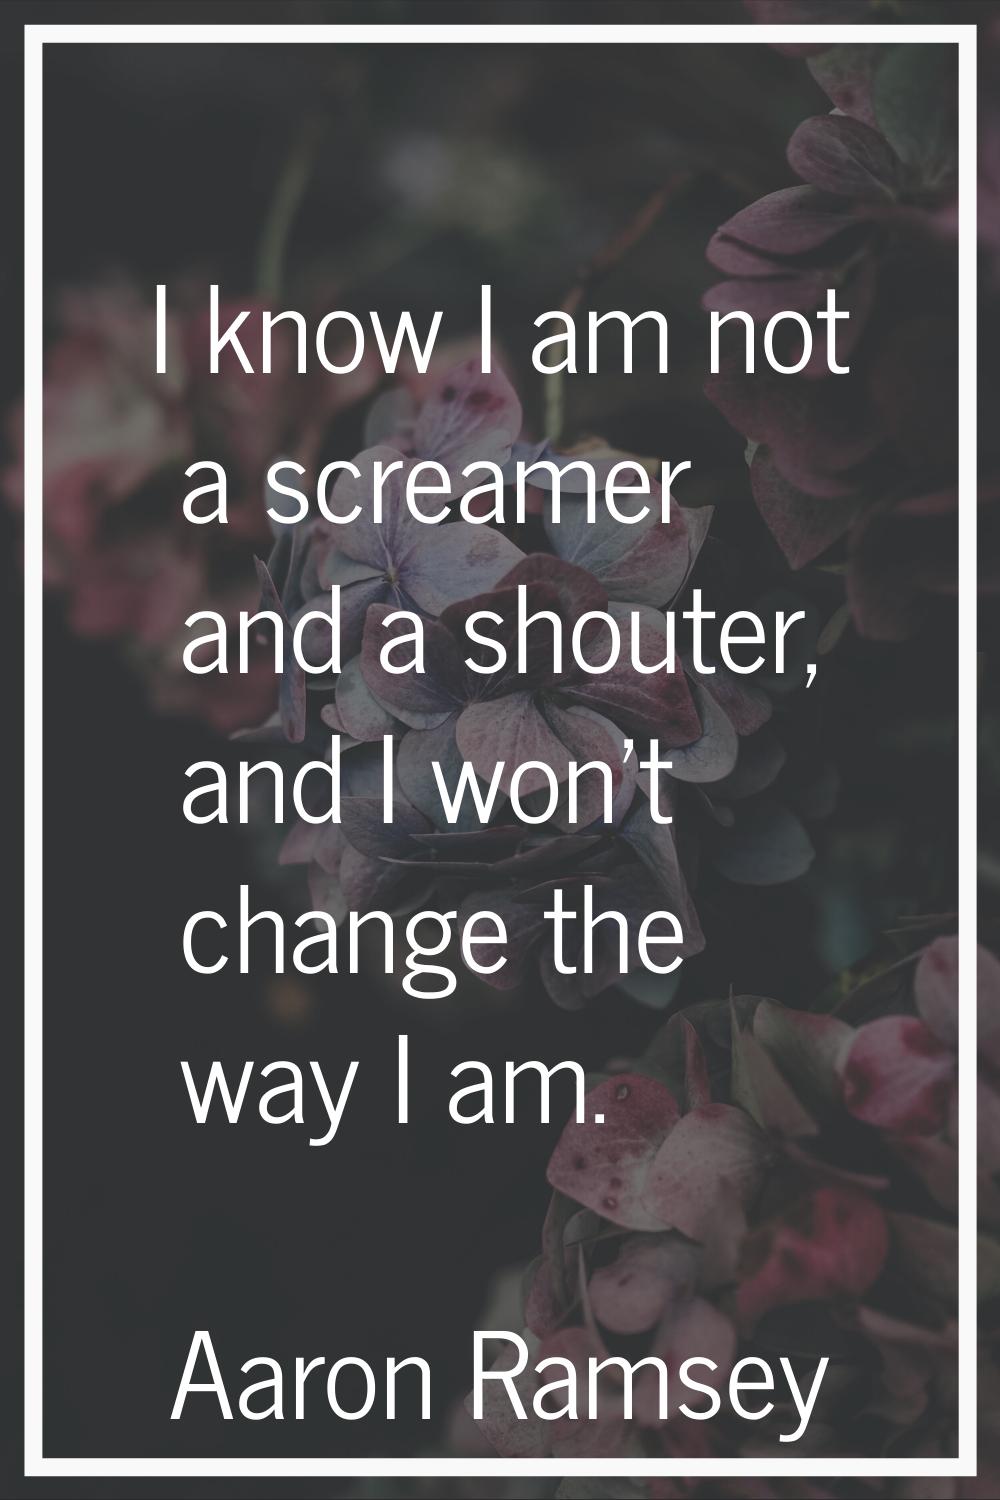 I know I am not a screamer and a shouter, and I won't change the way I am.